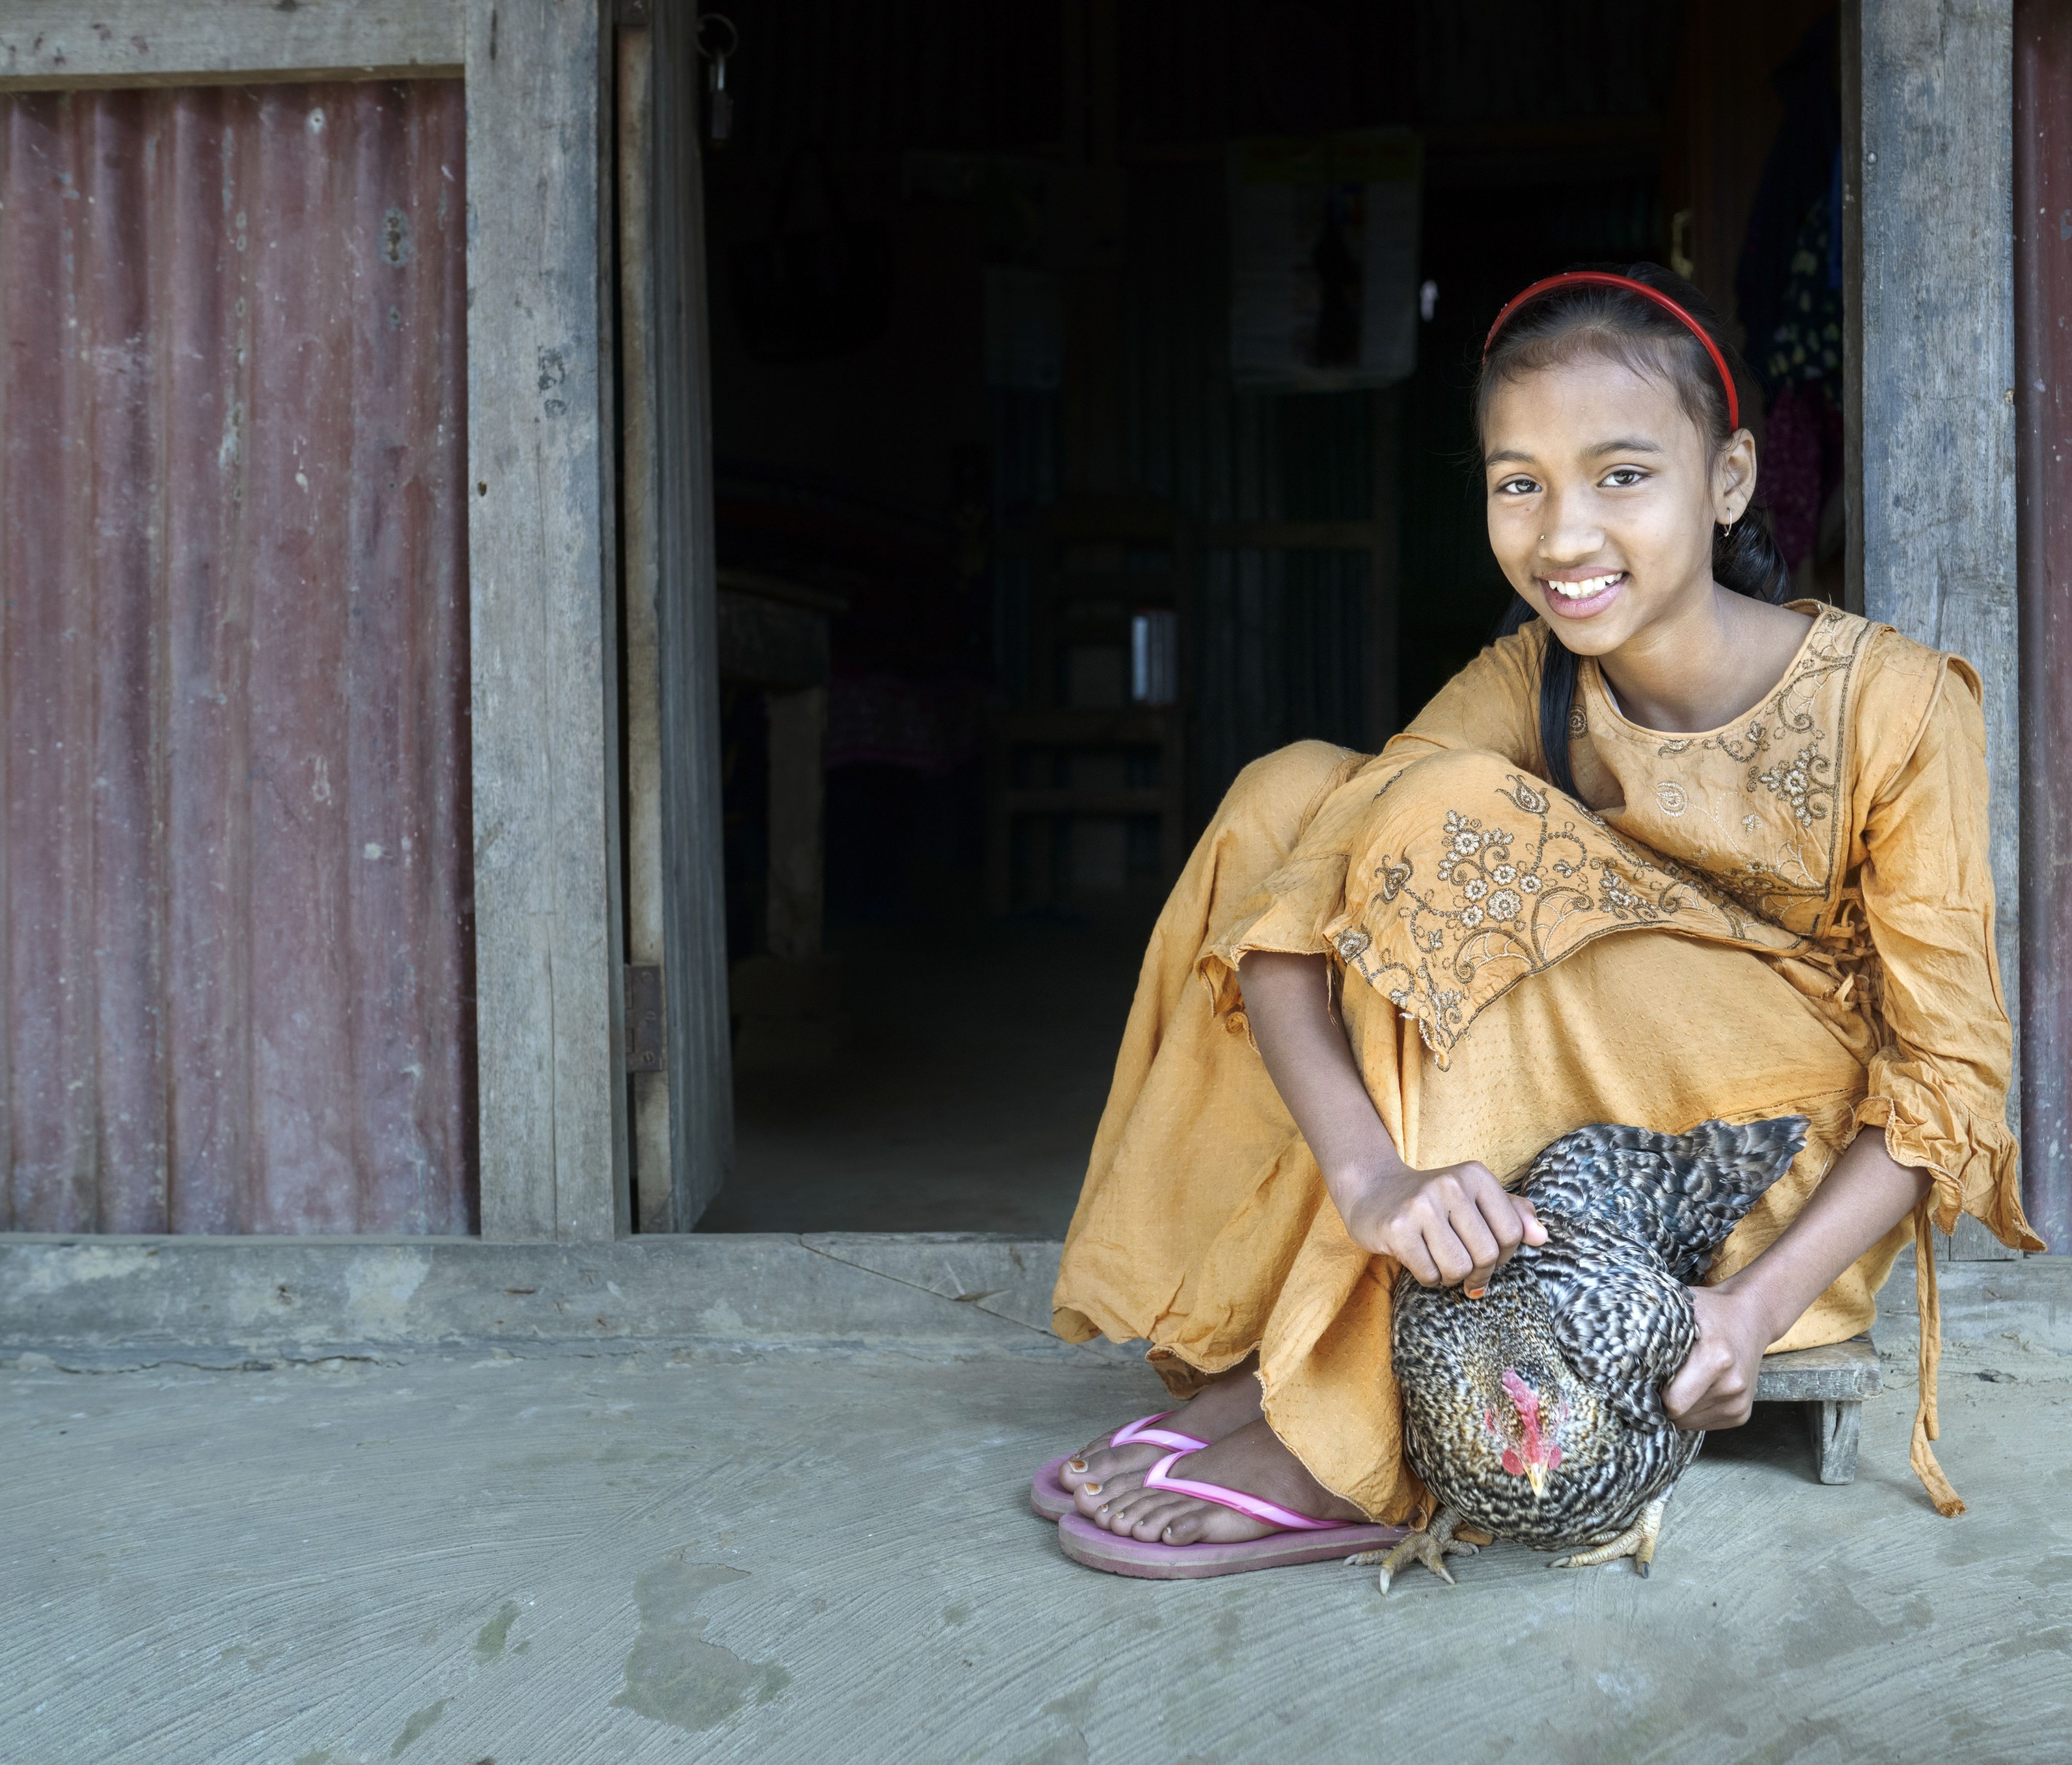 Afsa, 9, holds one of her favourite chickens 'chickoo' at home in Sylhet, Bangladesh